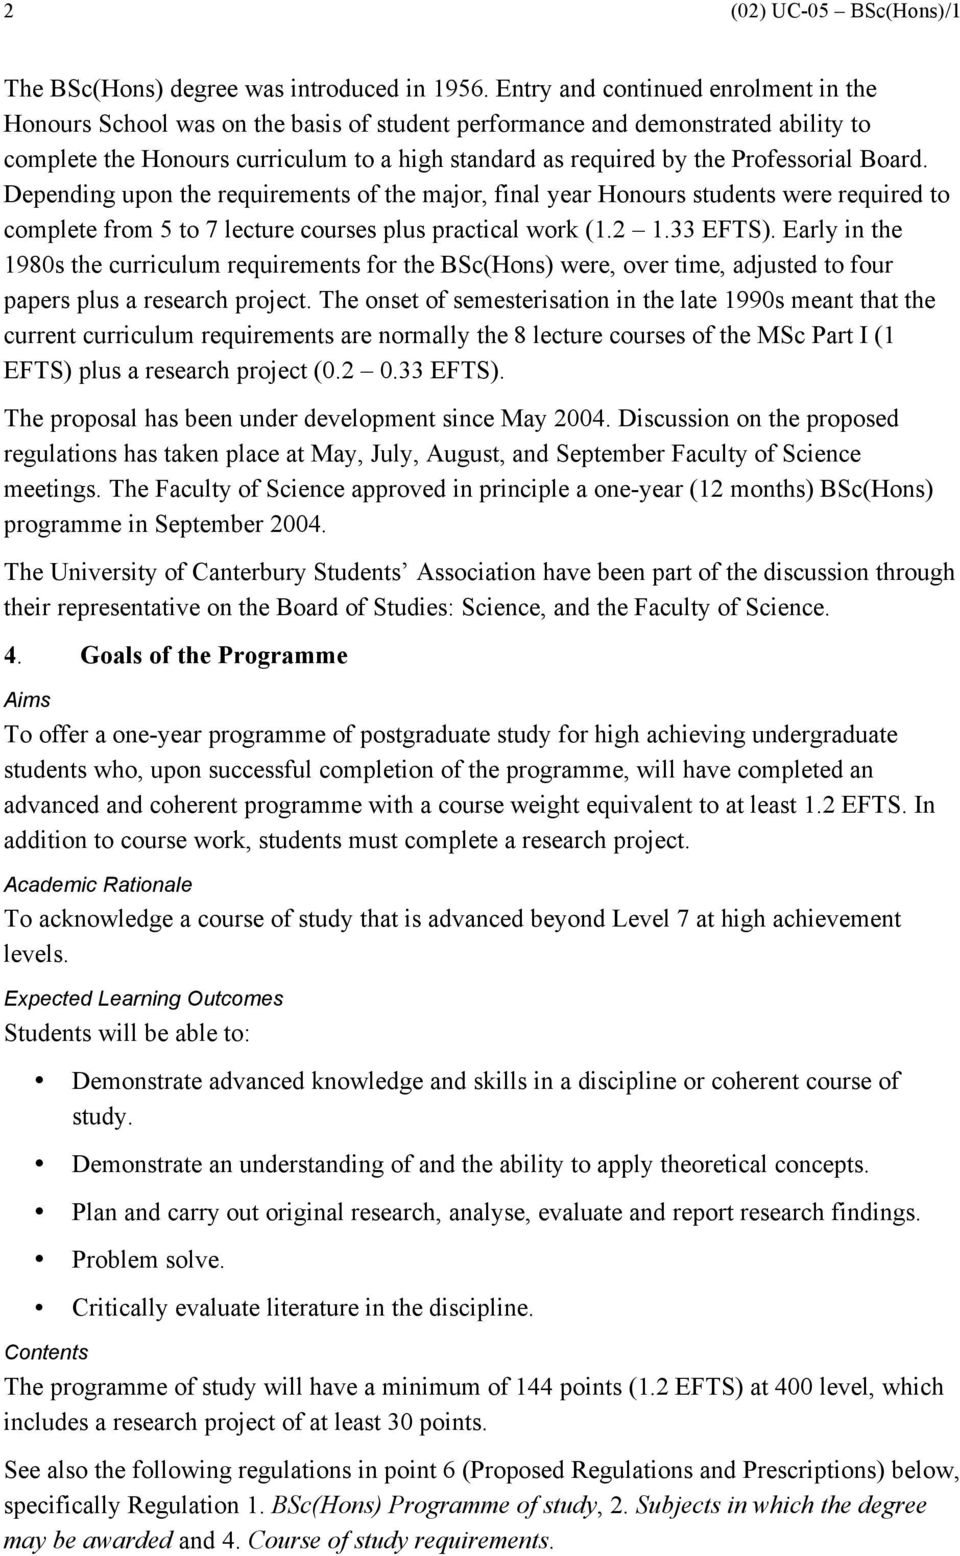 Professorial Board. Depending upon the requirements of the major, final year Honours students were required to complete from 5 to 7 lecture courses plus practical work (1.2 1.33 EFTS).